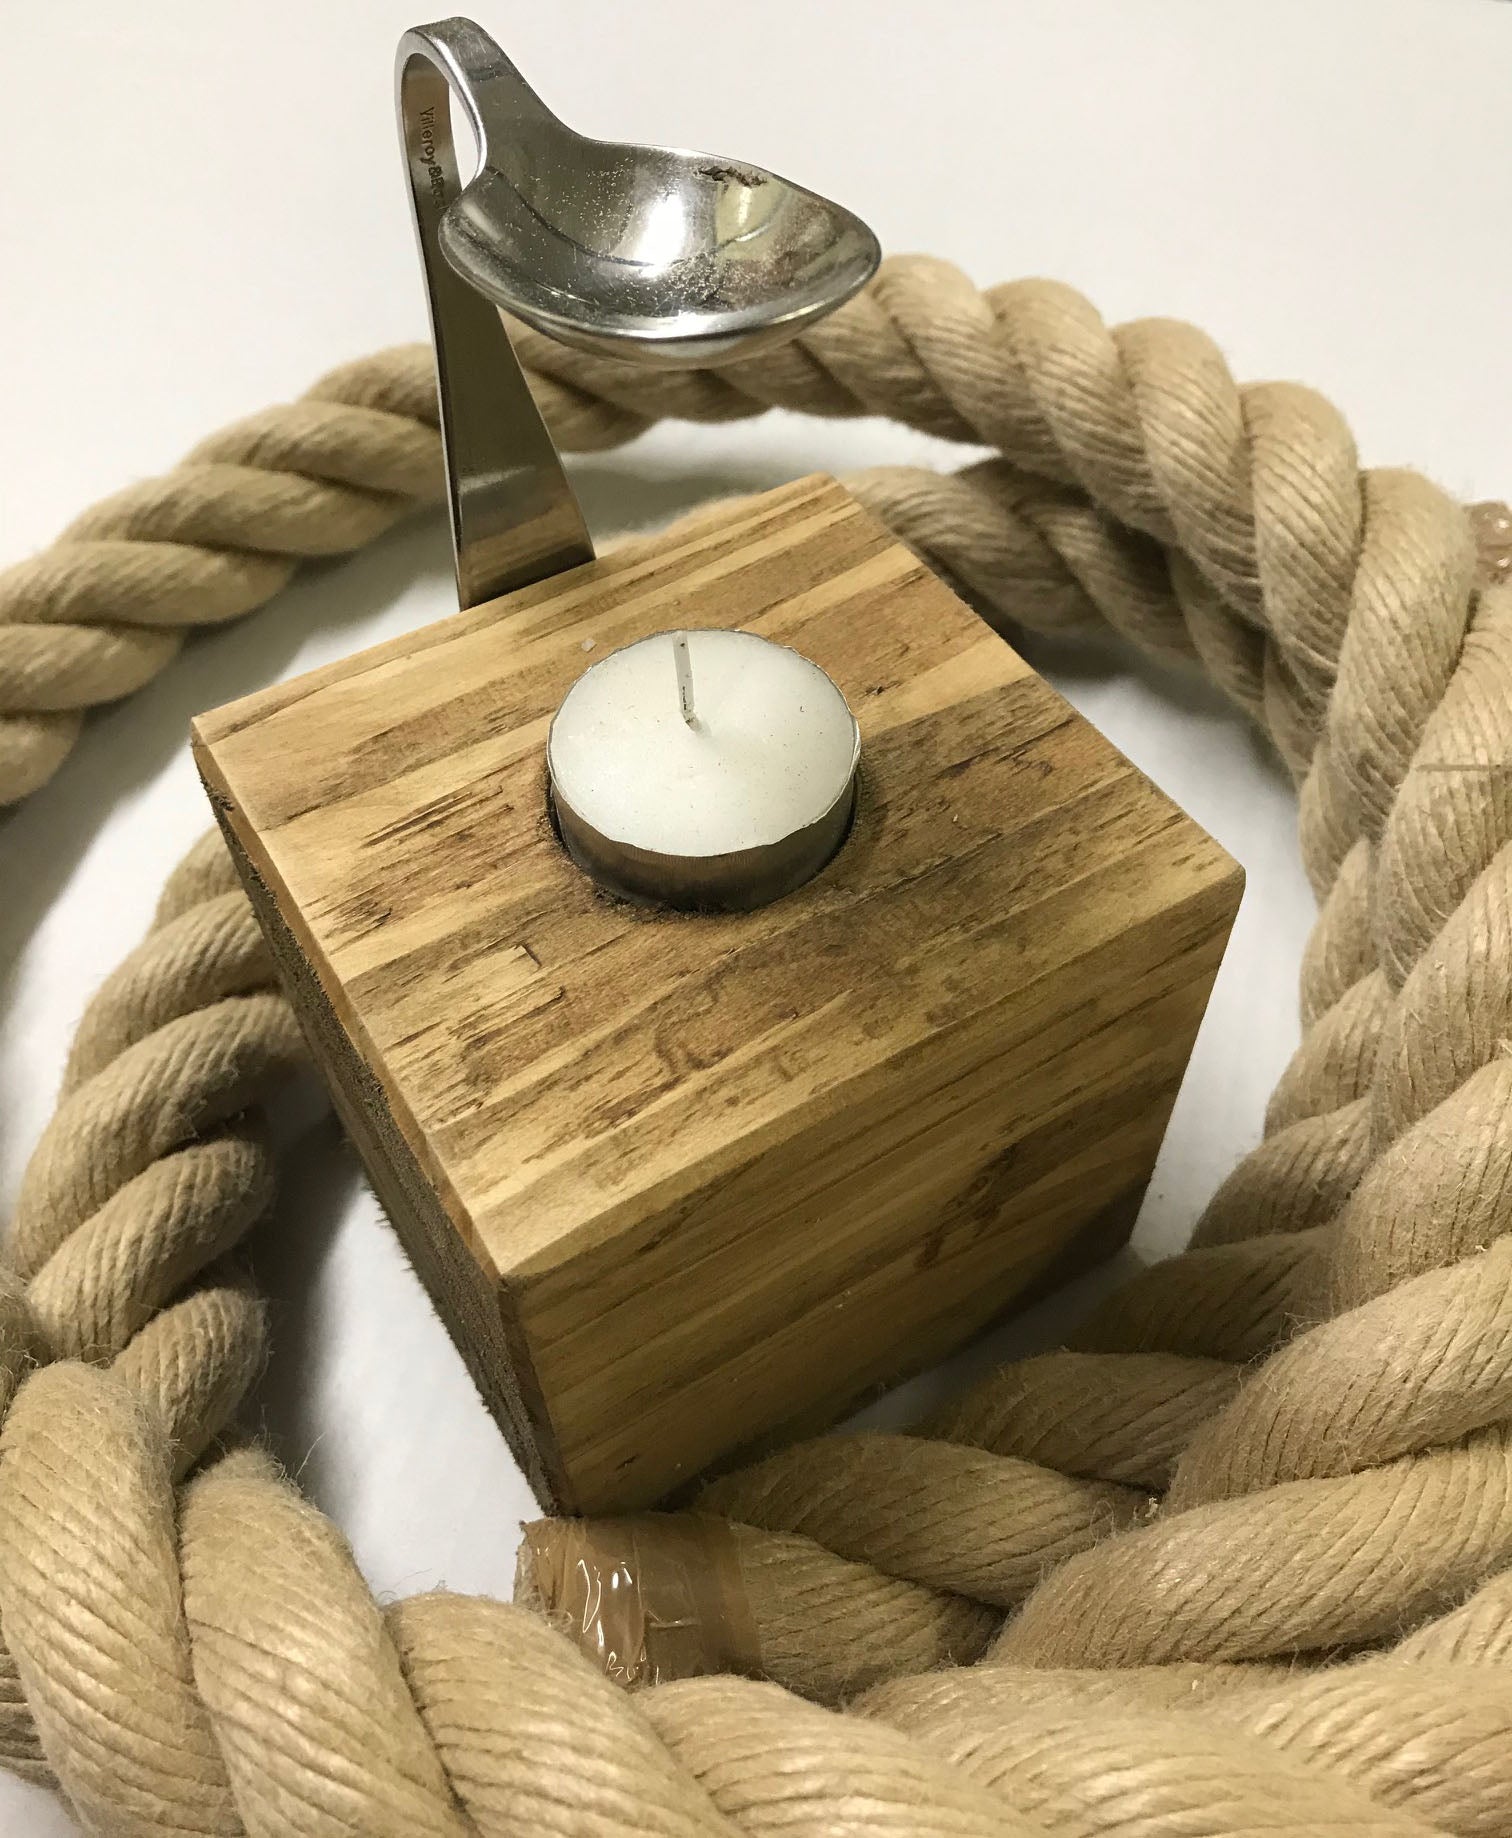 Spoon diffuser and tea lite holder